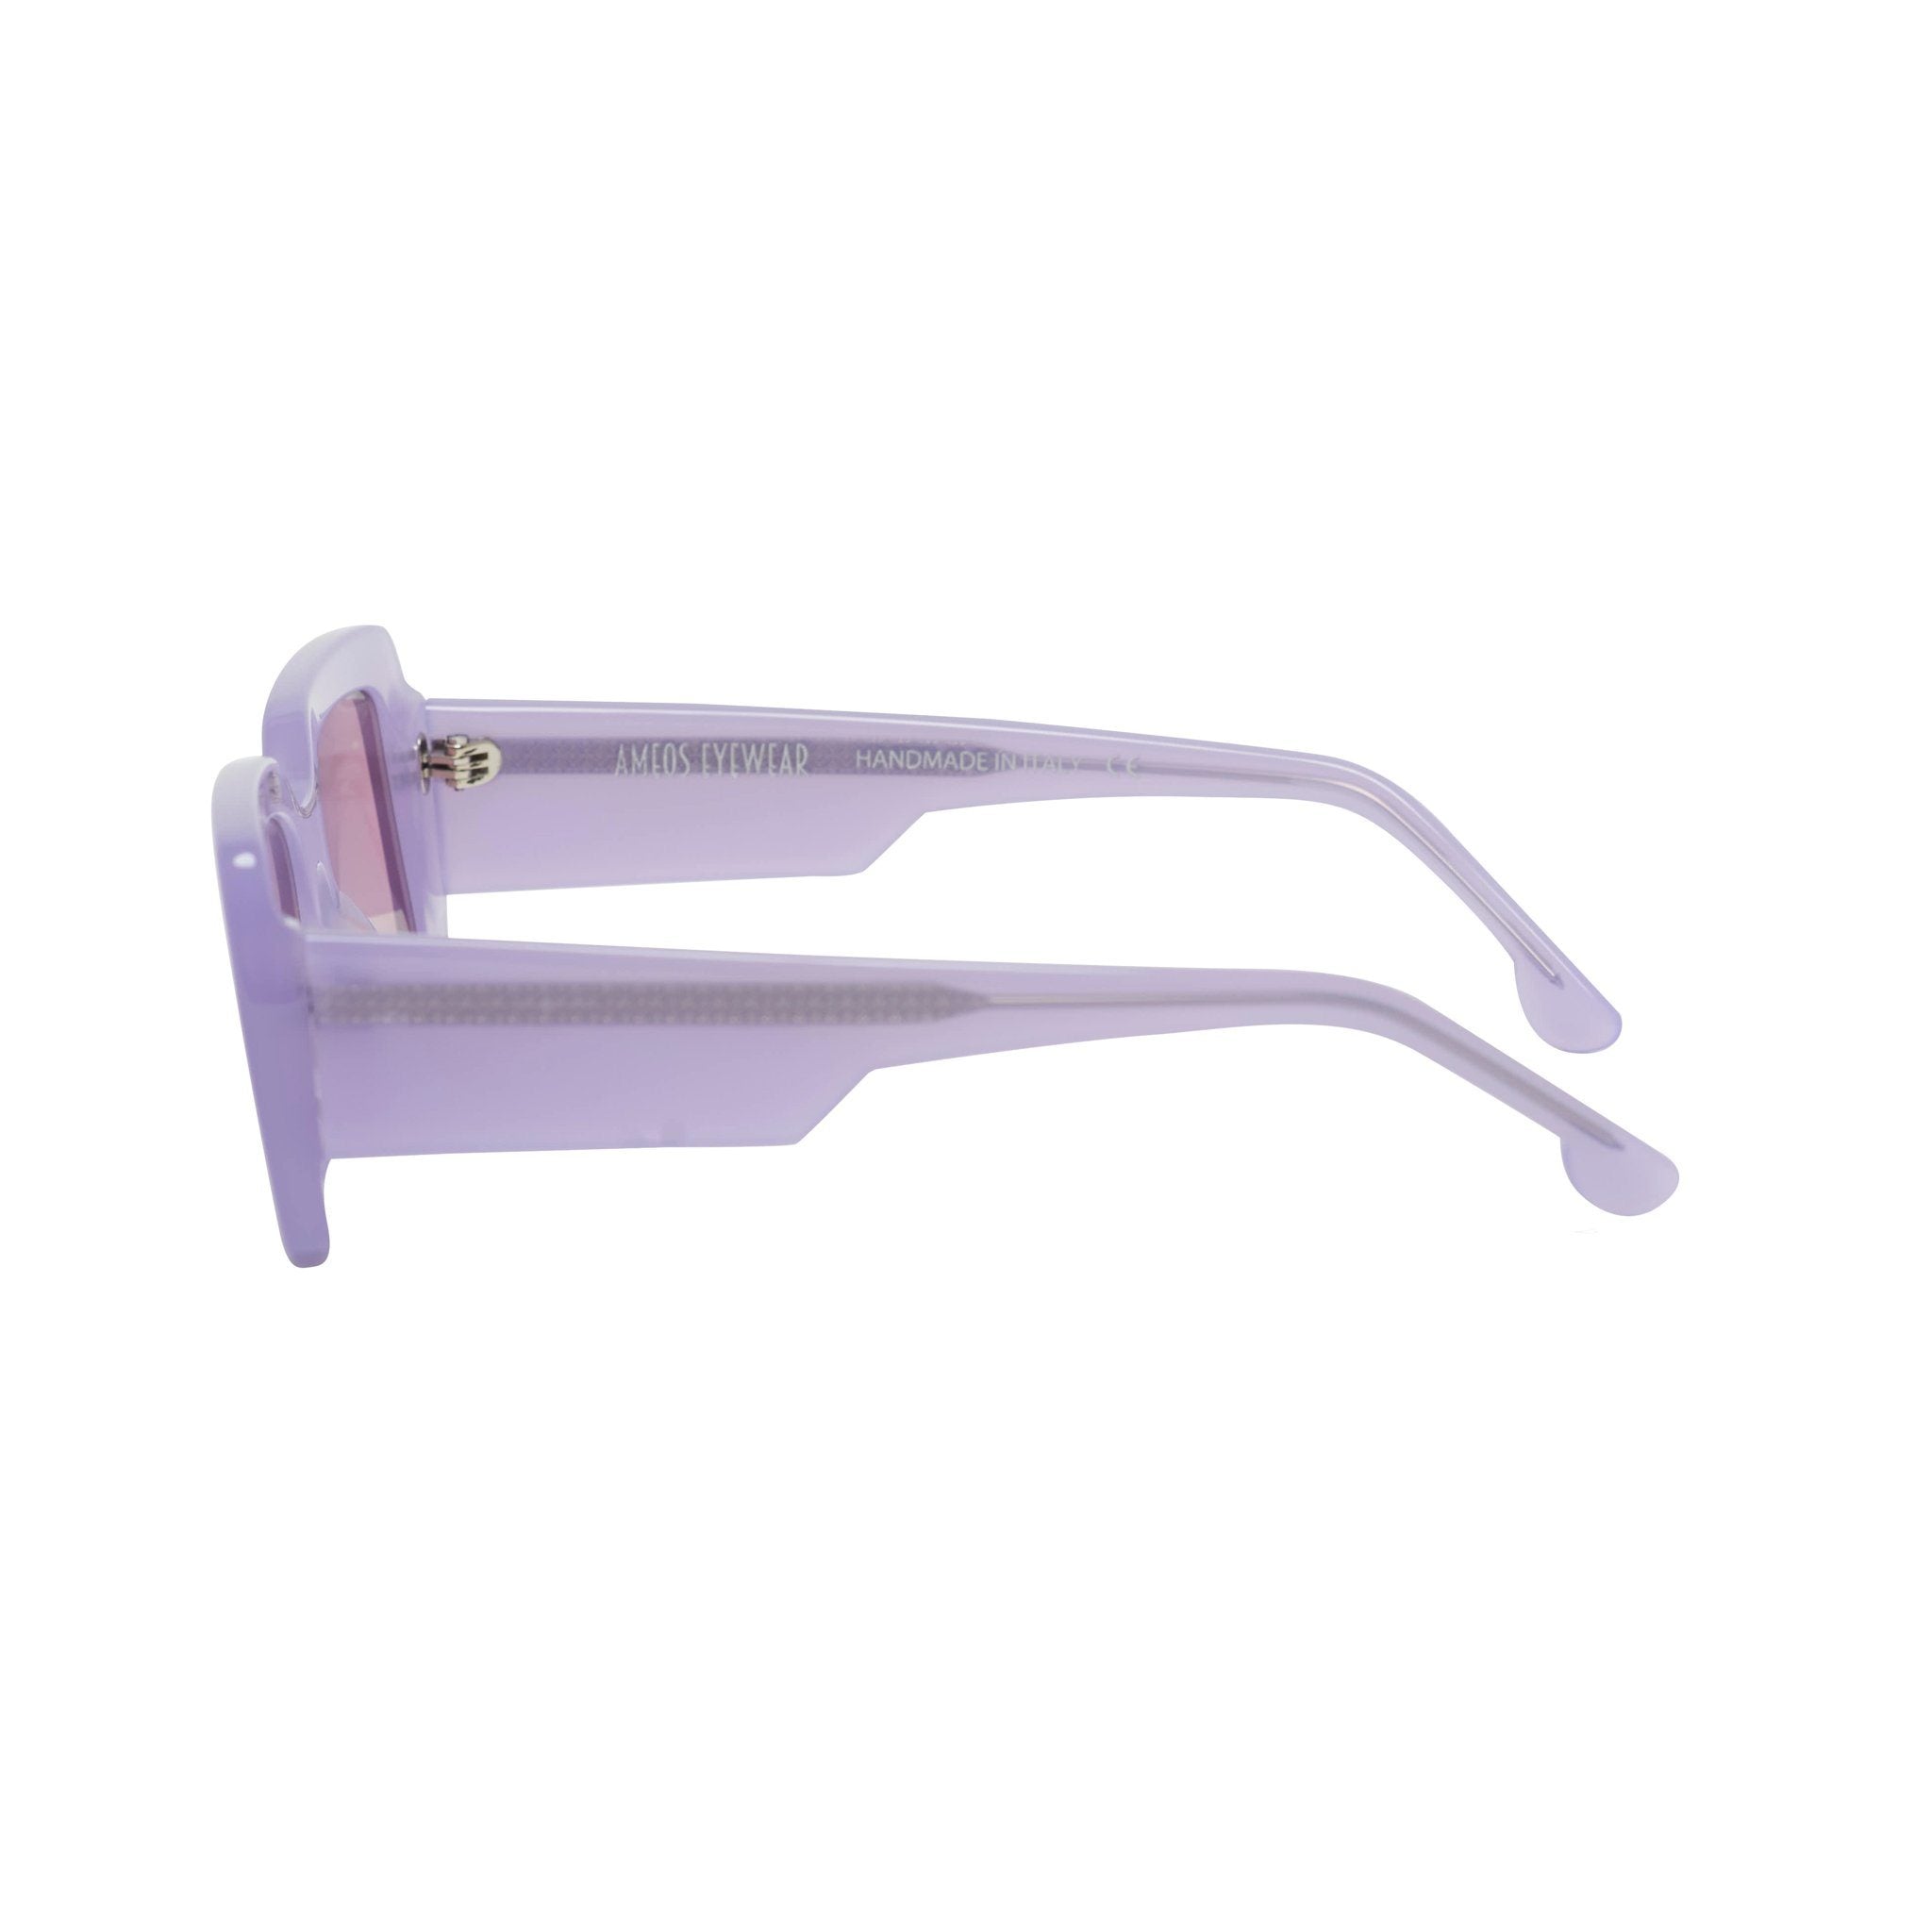 Purple sunglasses frames with pink lenses handmade in italy. Side view